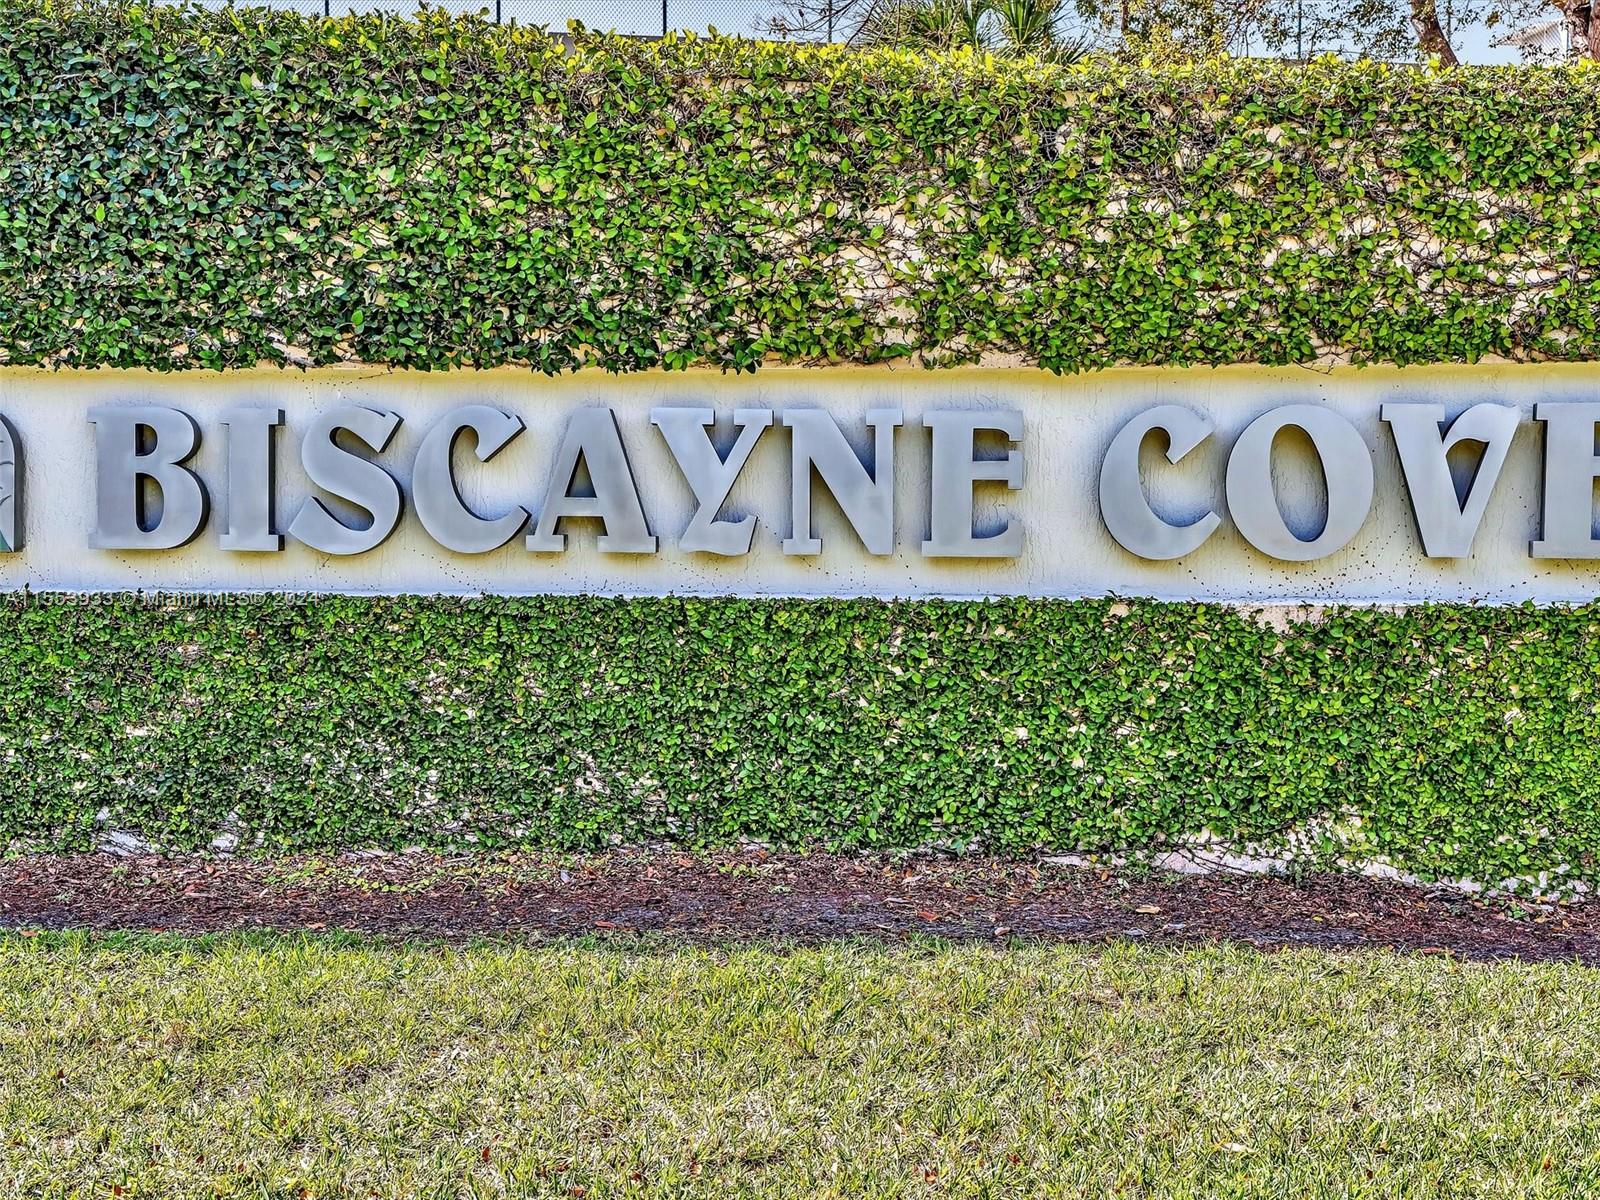 Biscayne Cove image #68